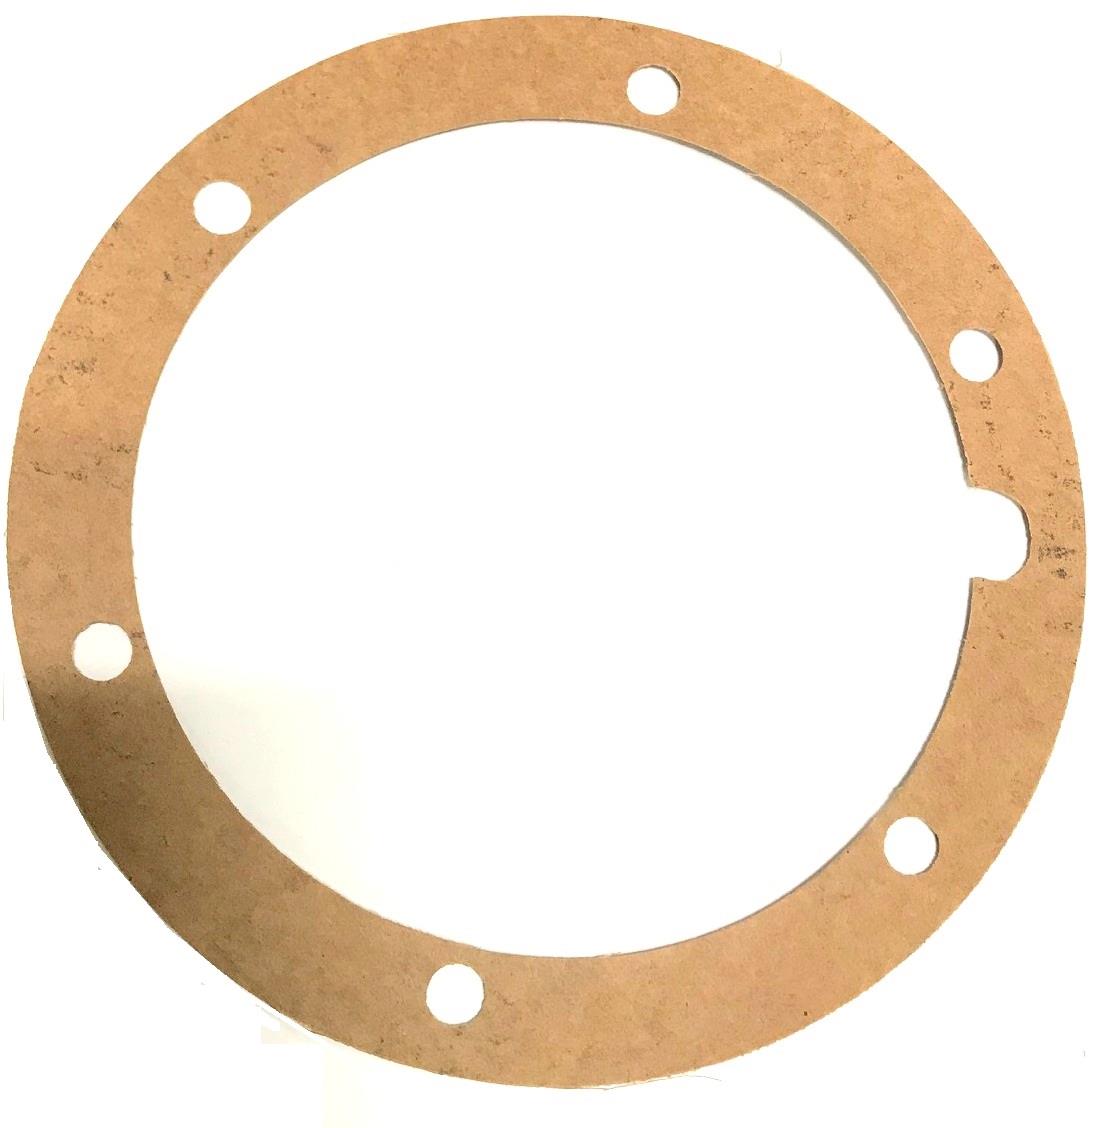 5T-977 | 5T-977  Gasket Cover Pinion Differential Cover Gasket  (1).jpg